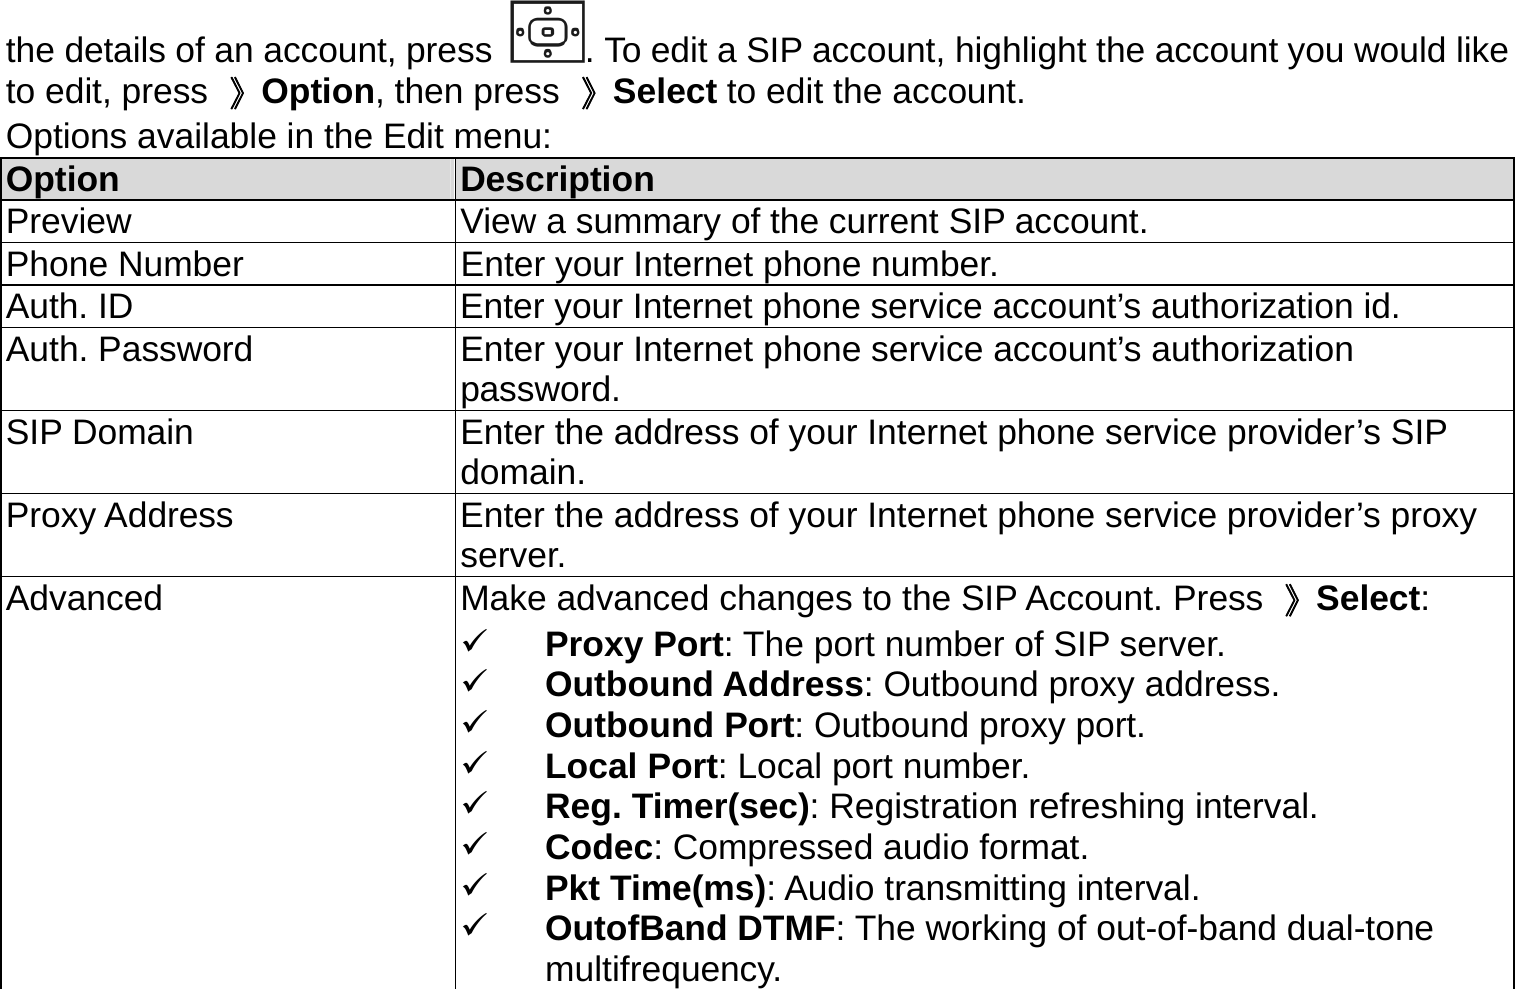 the details of an account, press  . To edit a SIP account, highlight the account you would like to edit, press  》Option, then press  》Select to edit the account.   Options available in the Edit menu: Option  Description Preview  View a summary of the current SIP account. Phone Number  Enter your Internet phone number. Auth. ID  Enter your Internet phone service account’s authorization id. Auth. Password  Enter your Internet phone service account’s authorization password. SIP Domain  Enter the address of your Internet phone service provider’s SIP domain. Proxy Address  Enter the address of your Internet phone service provider’s proxy server. Advanced  Make advanced changes to the SIP Account. Press  》Select:   Proxy Port: The port number of SIP server.   Outbound Address: Outbound proxy address.   Outbound Port: Outbound proxy port.   Local Port: Local port number.   Reg. Timer(sec): Registration refreshing interval.   Codec: Compressed audio format.   Pkt Time(ms): Audio transmitting interval.   OutofBand DTMF: The working of out-of-band dual-tone multifrequency. 